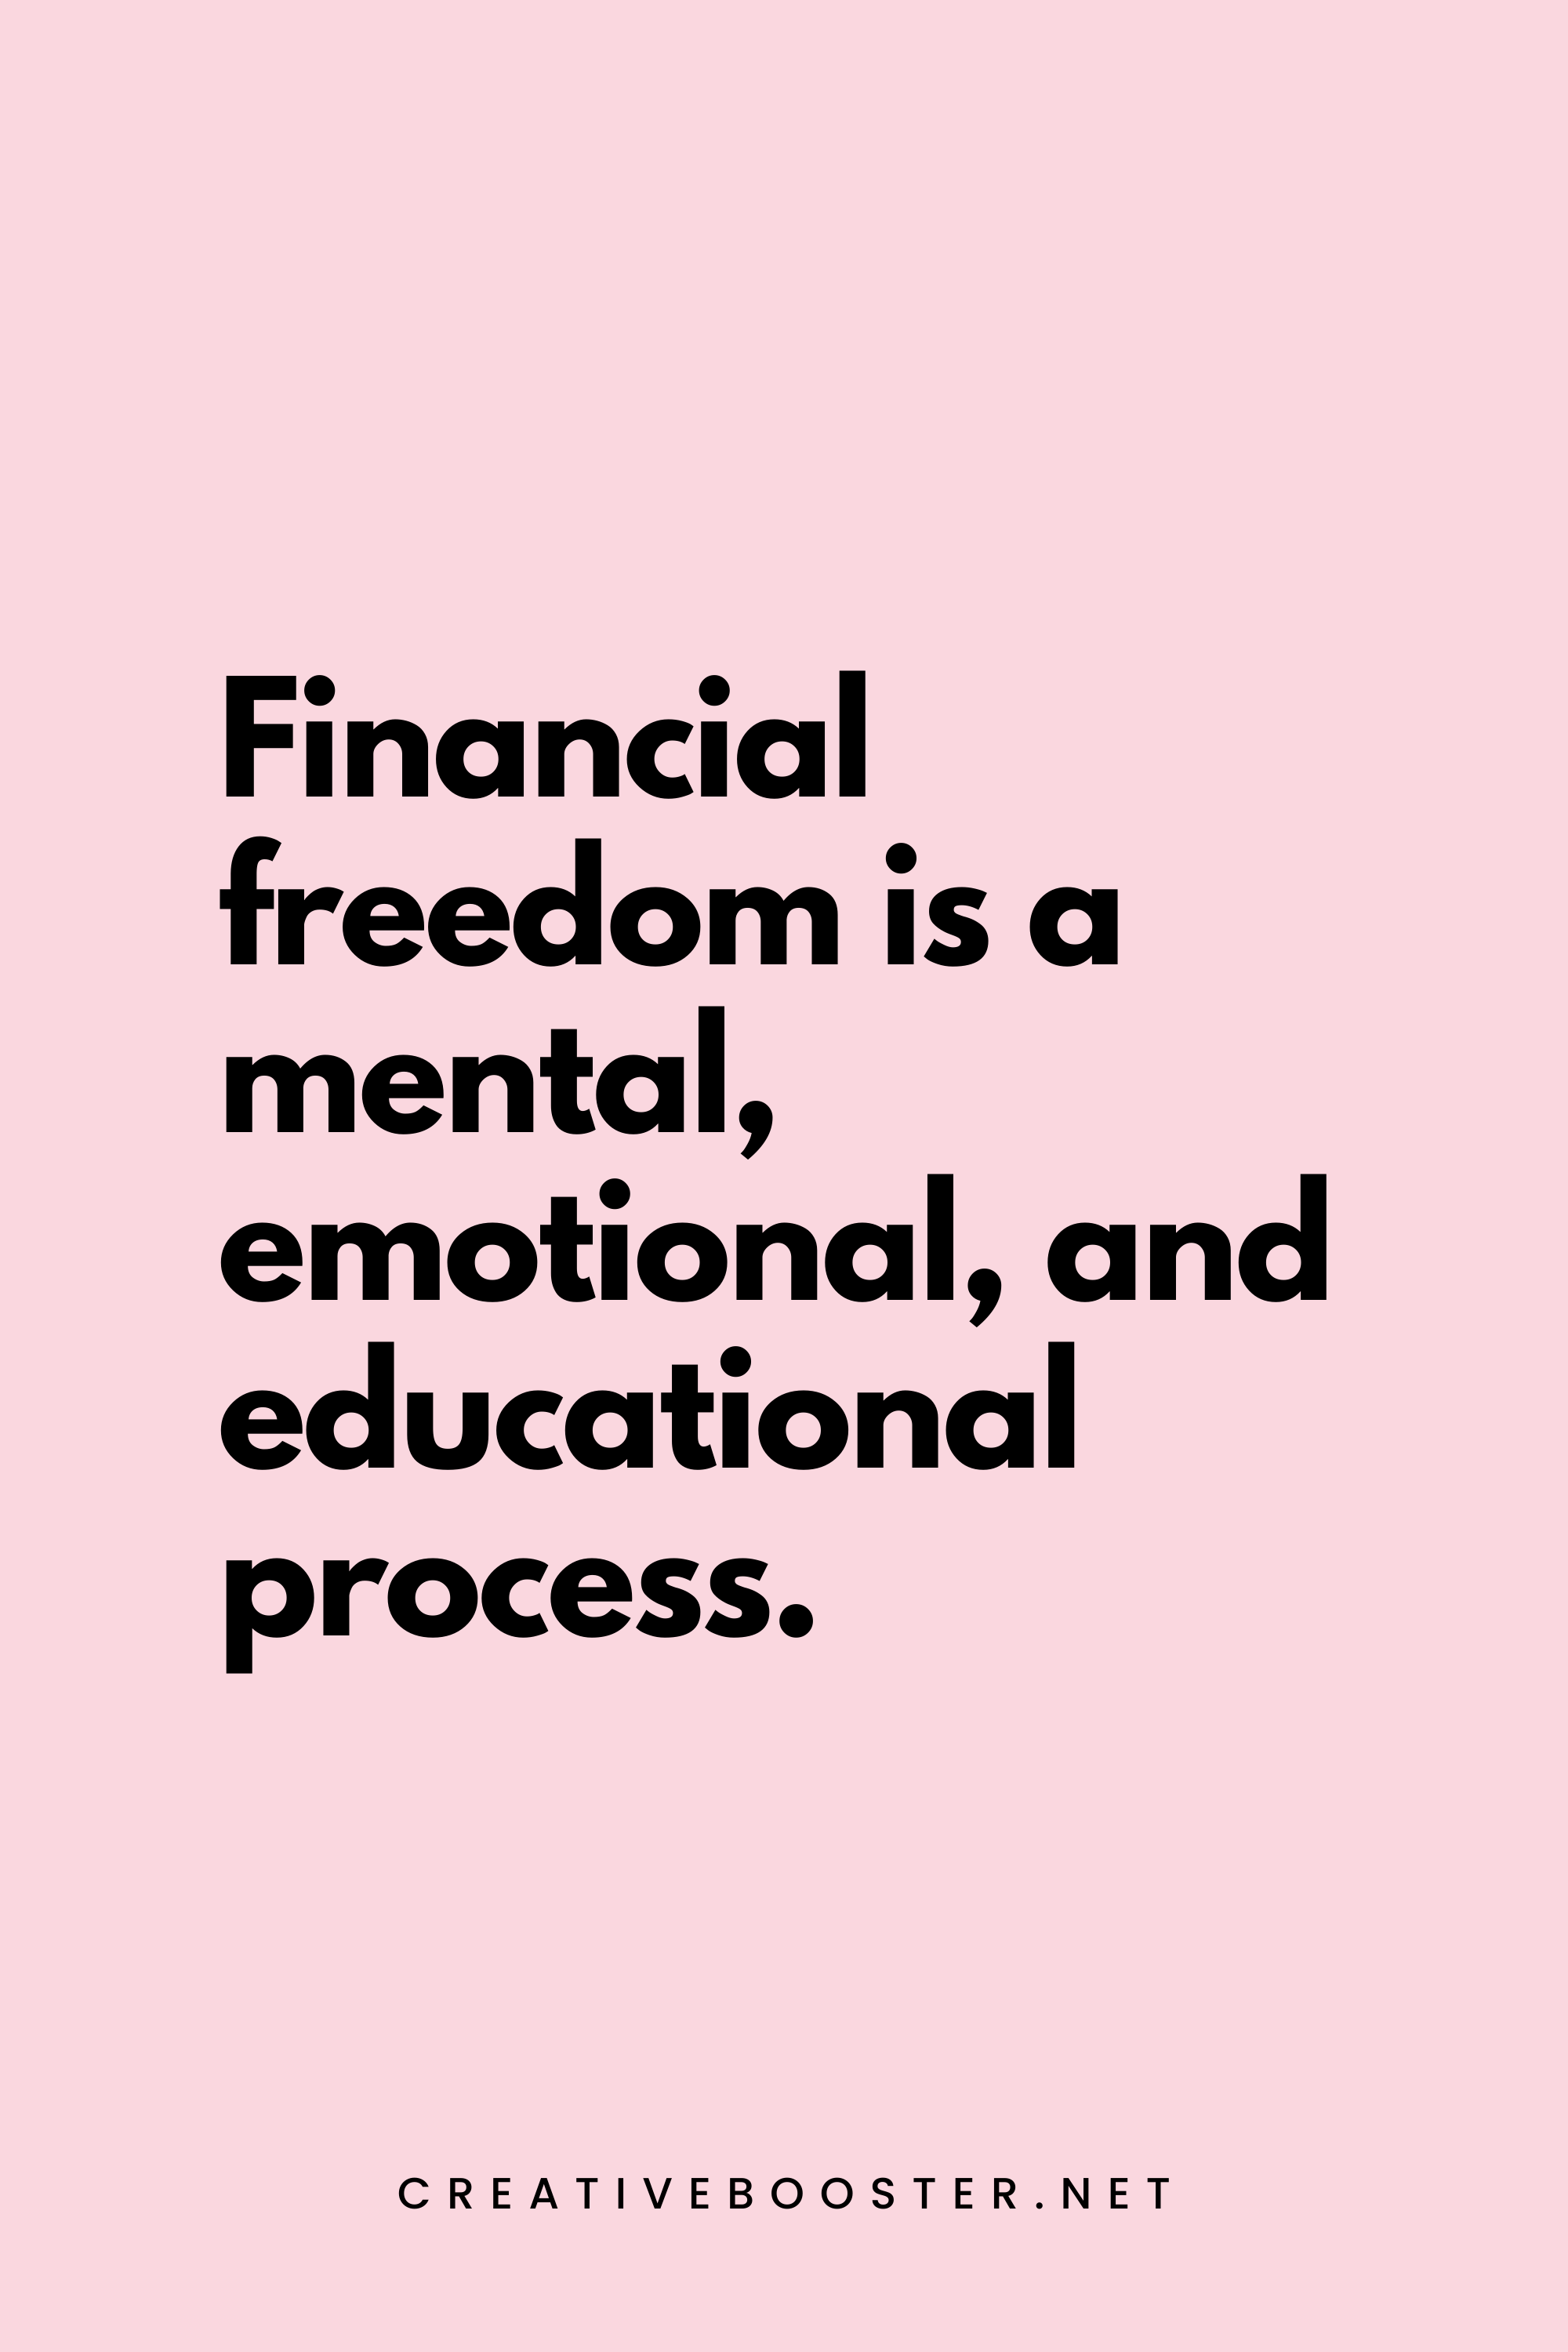 36. Financial freedom is a mental, emotional, and educational process. - Robert Kiyosaki - 3. Financial Freedom Quotes for Students